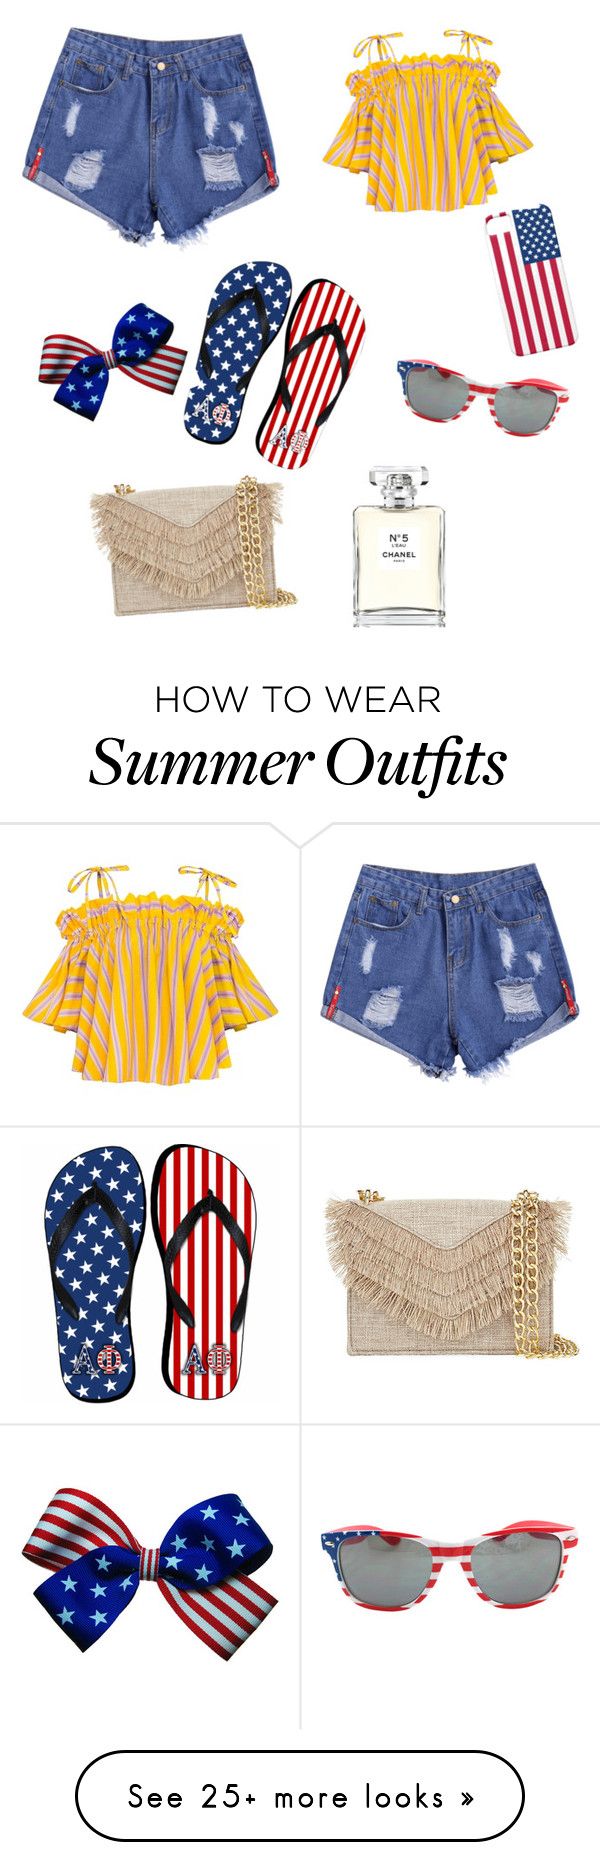 "Summer Outfit" by monicapavel on Polyvore featuring Cynthia Rowley an...